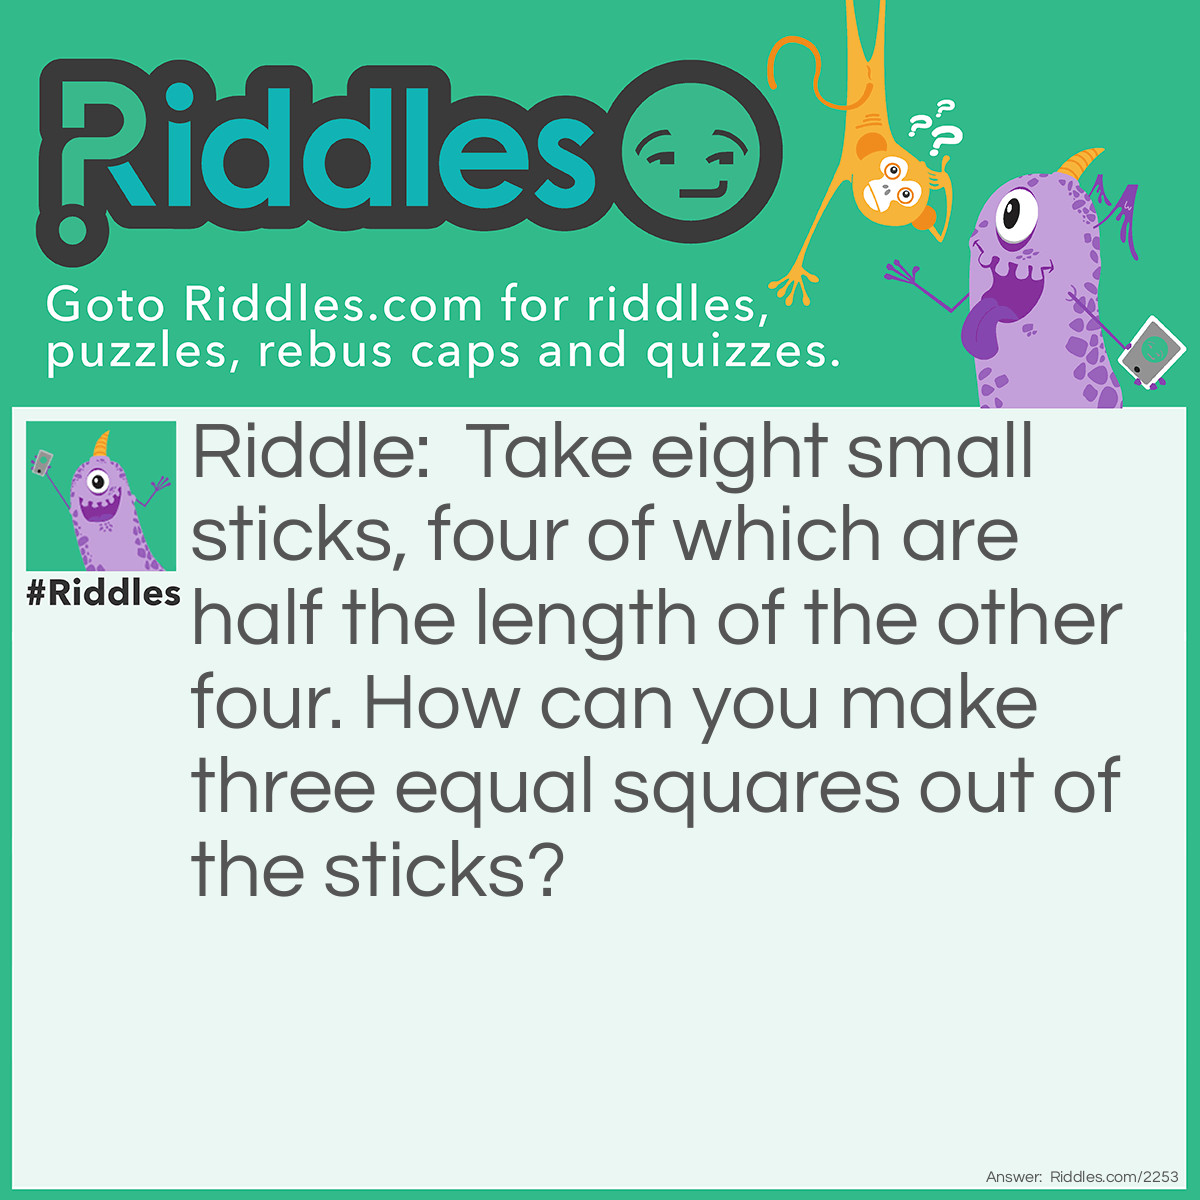 Riddle: Take eight small sticks, four of which are half the length of the other four. How can you make three equal squares out of the sticks? Answer: Use the longer four sticks to be sharing sides between the squares and at the end their should be three intertwined squares.
<img src="/uploads/images/8-sticks-3-squares.png" alt="" />